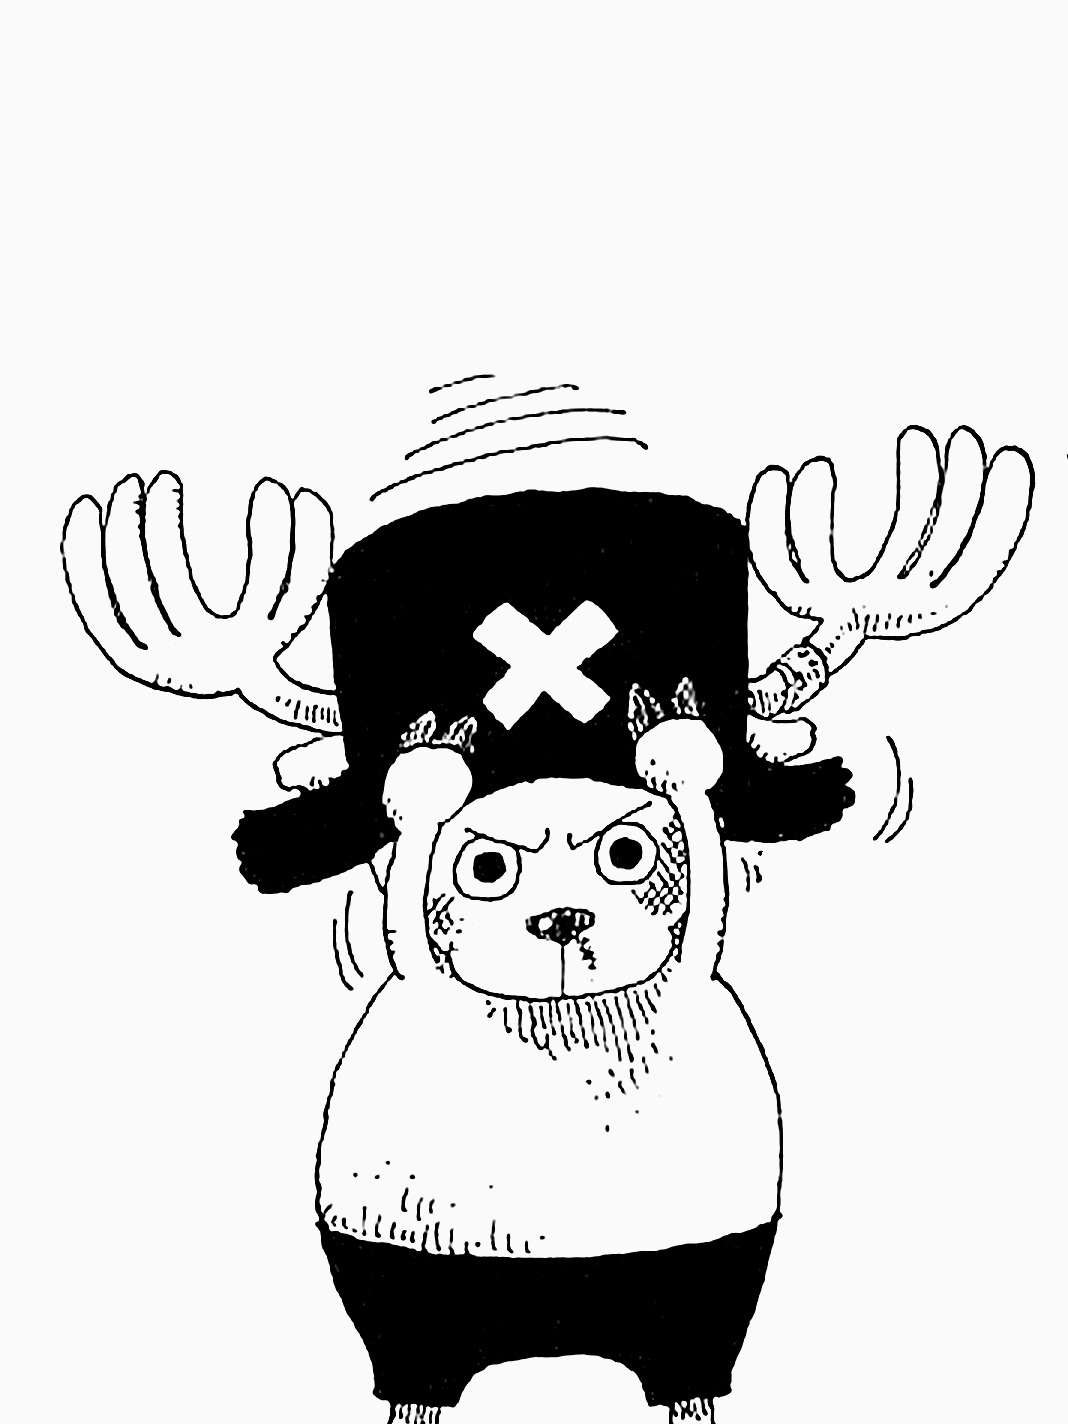 1k My Edits Mangacaps One Piece Tony Tony Chopper One Piece 595 Opgraphics Op Manga One Piece 725 Until 782 He Just Keeps Getting Cuter Tbh One Piece 143 One Piece